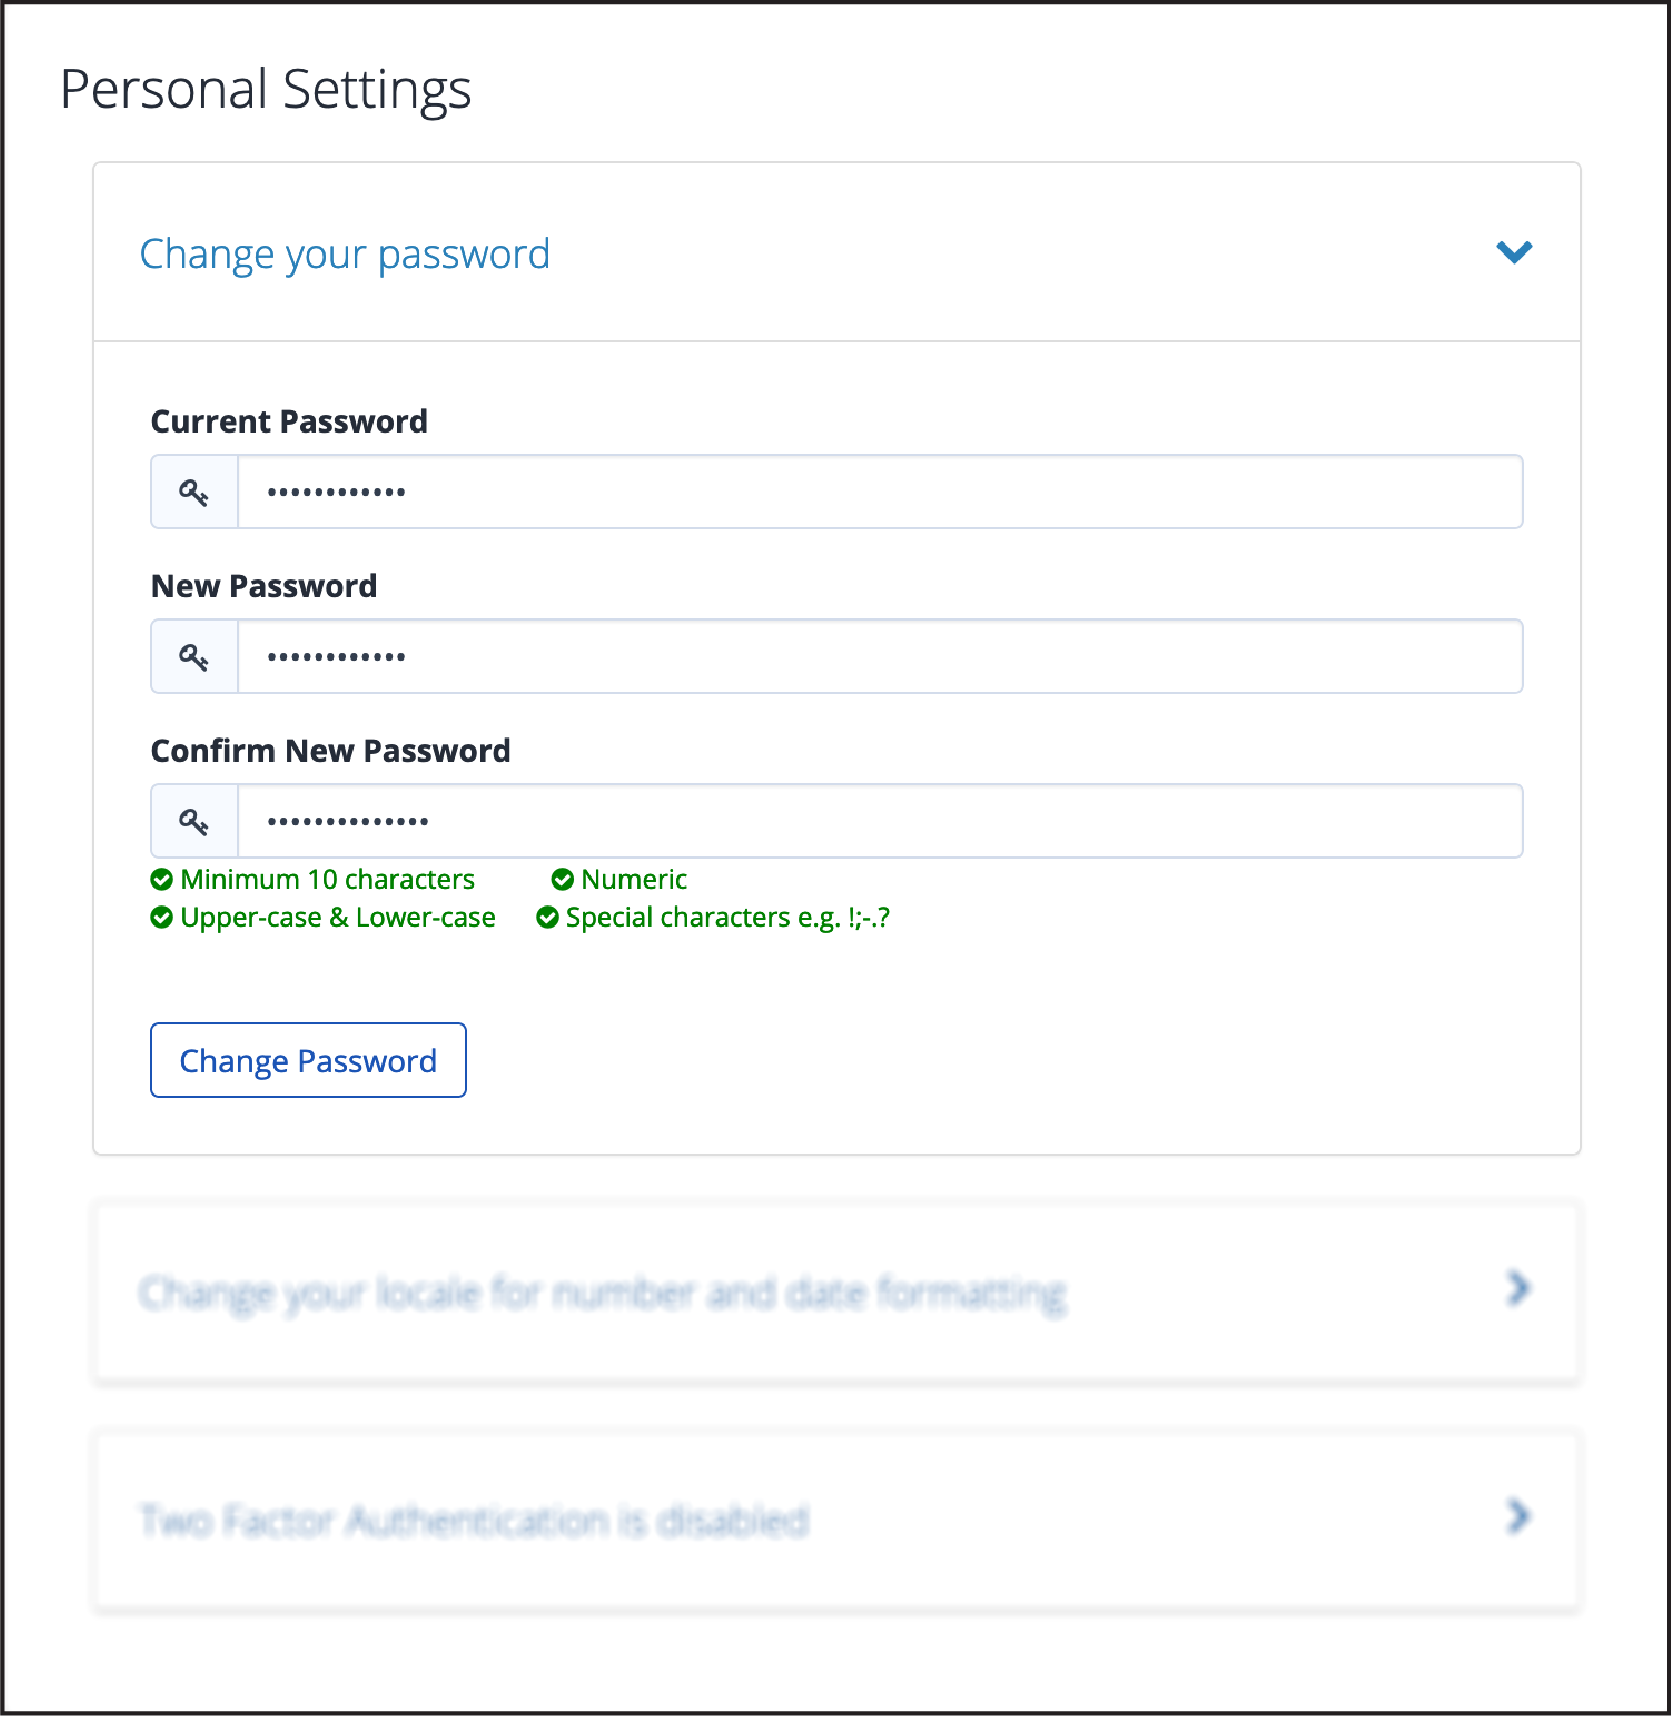 Personal Settings — Change your password